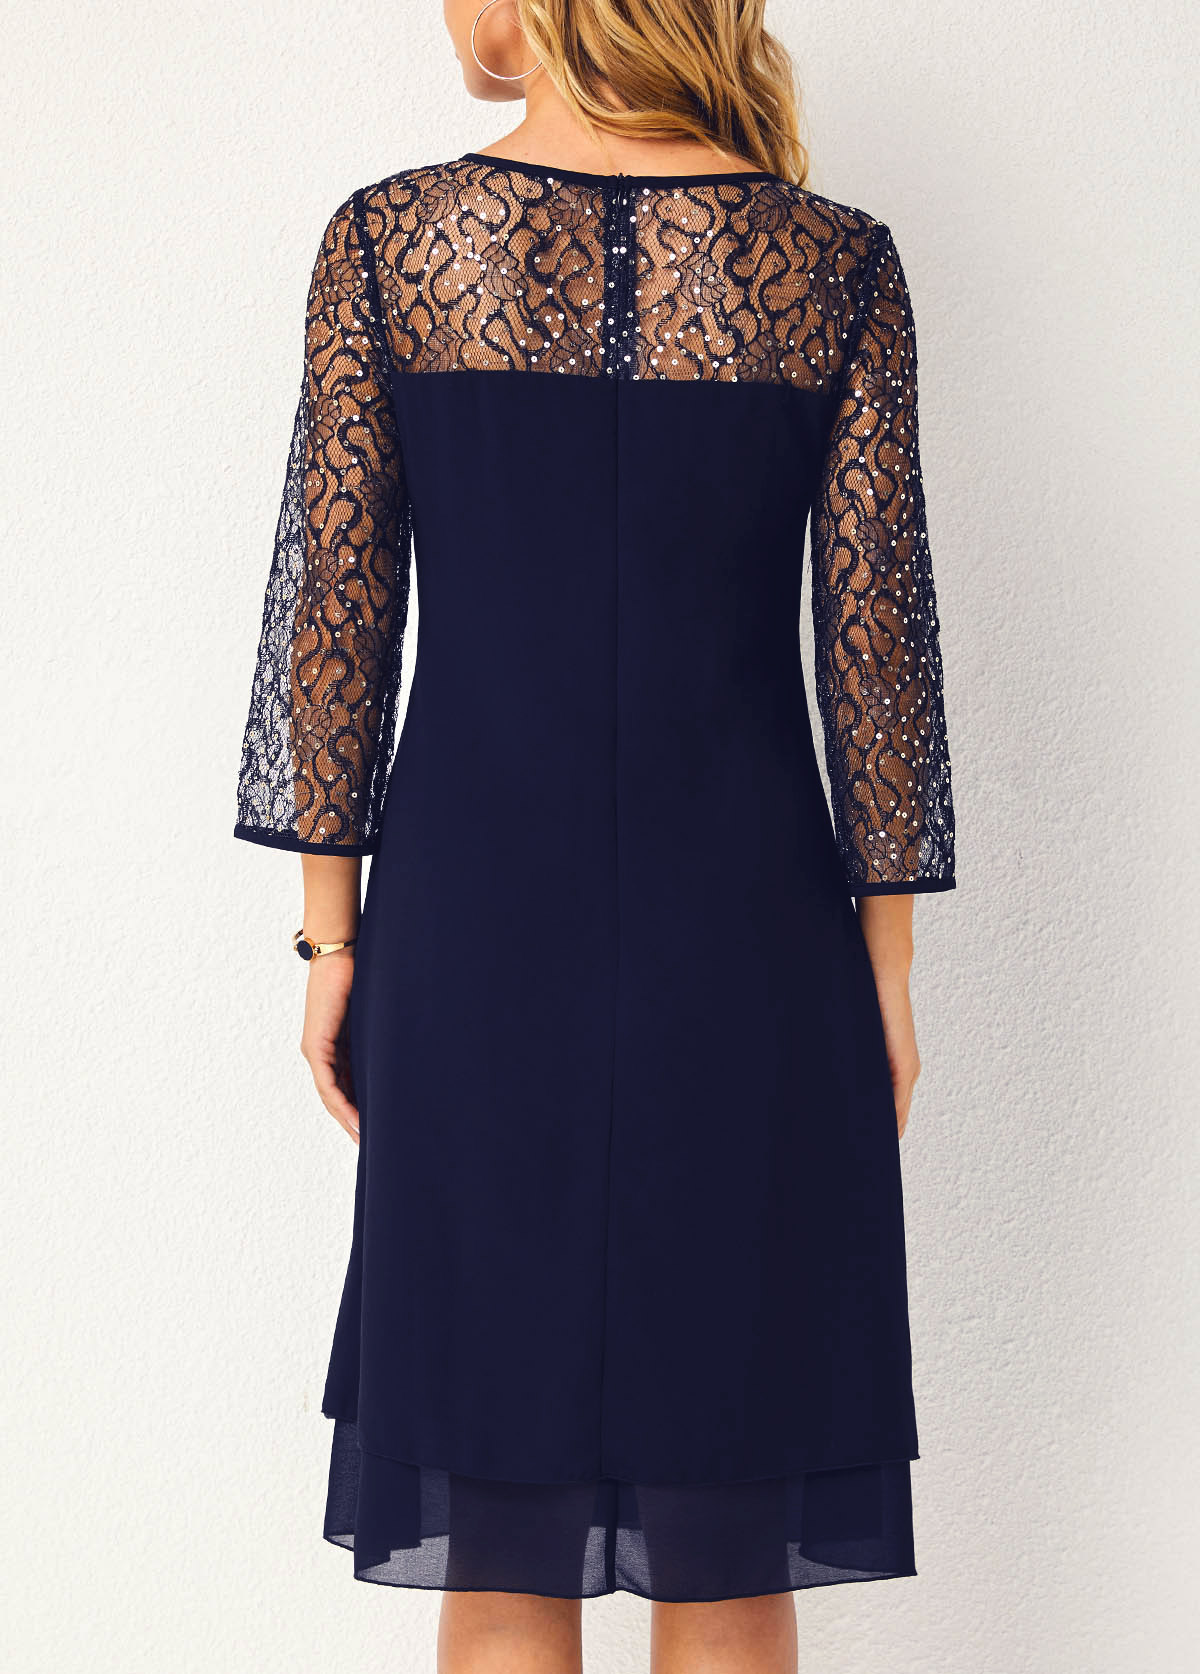 Sequin Lace Stitching Navy Blue Dress